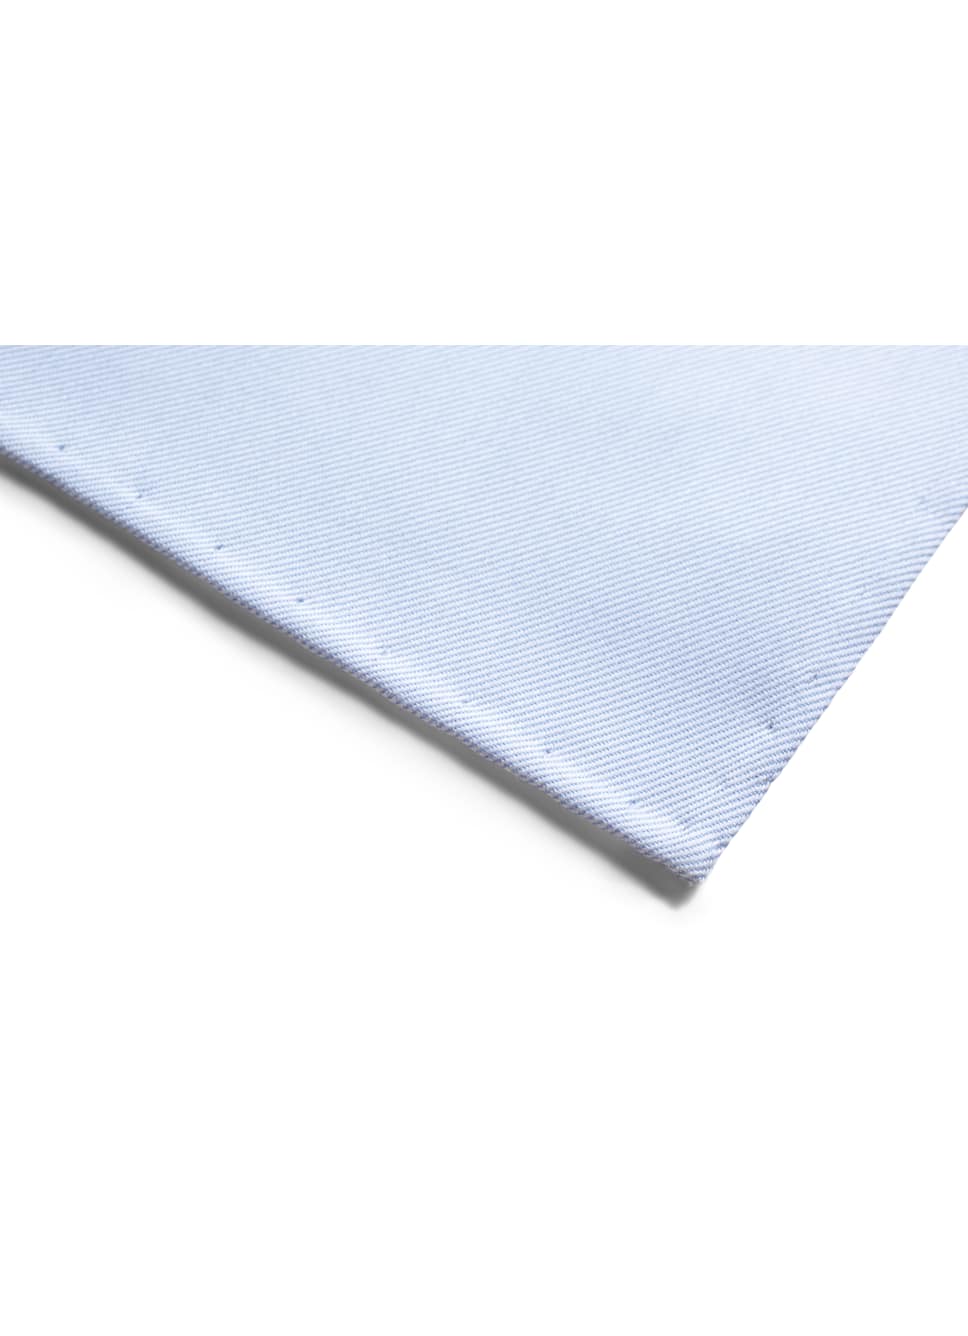 Blue Pocket Square Ps981 | Suitsupply Online Store